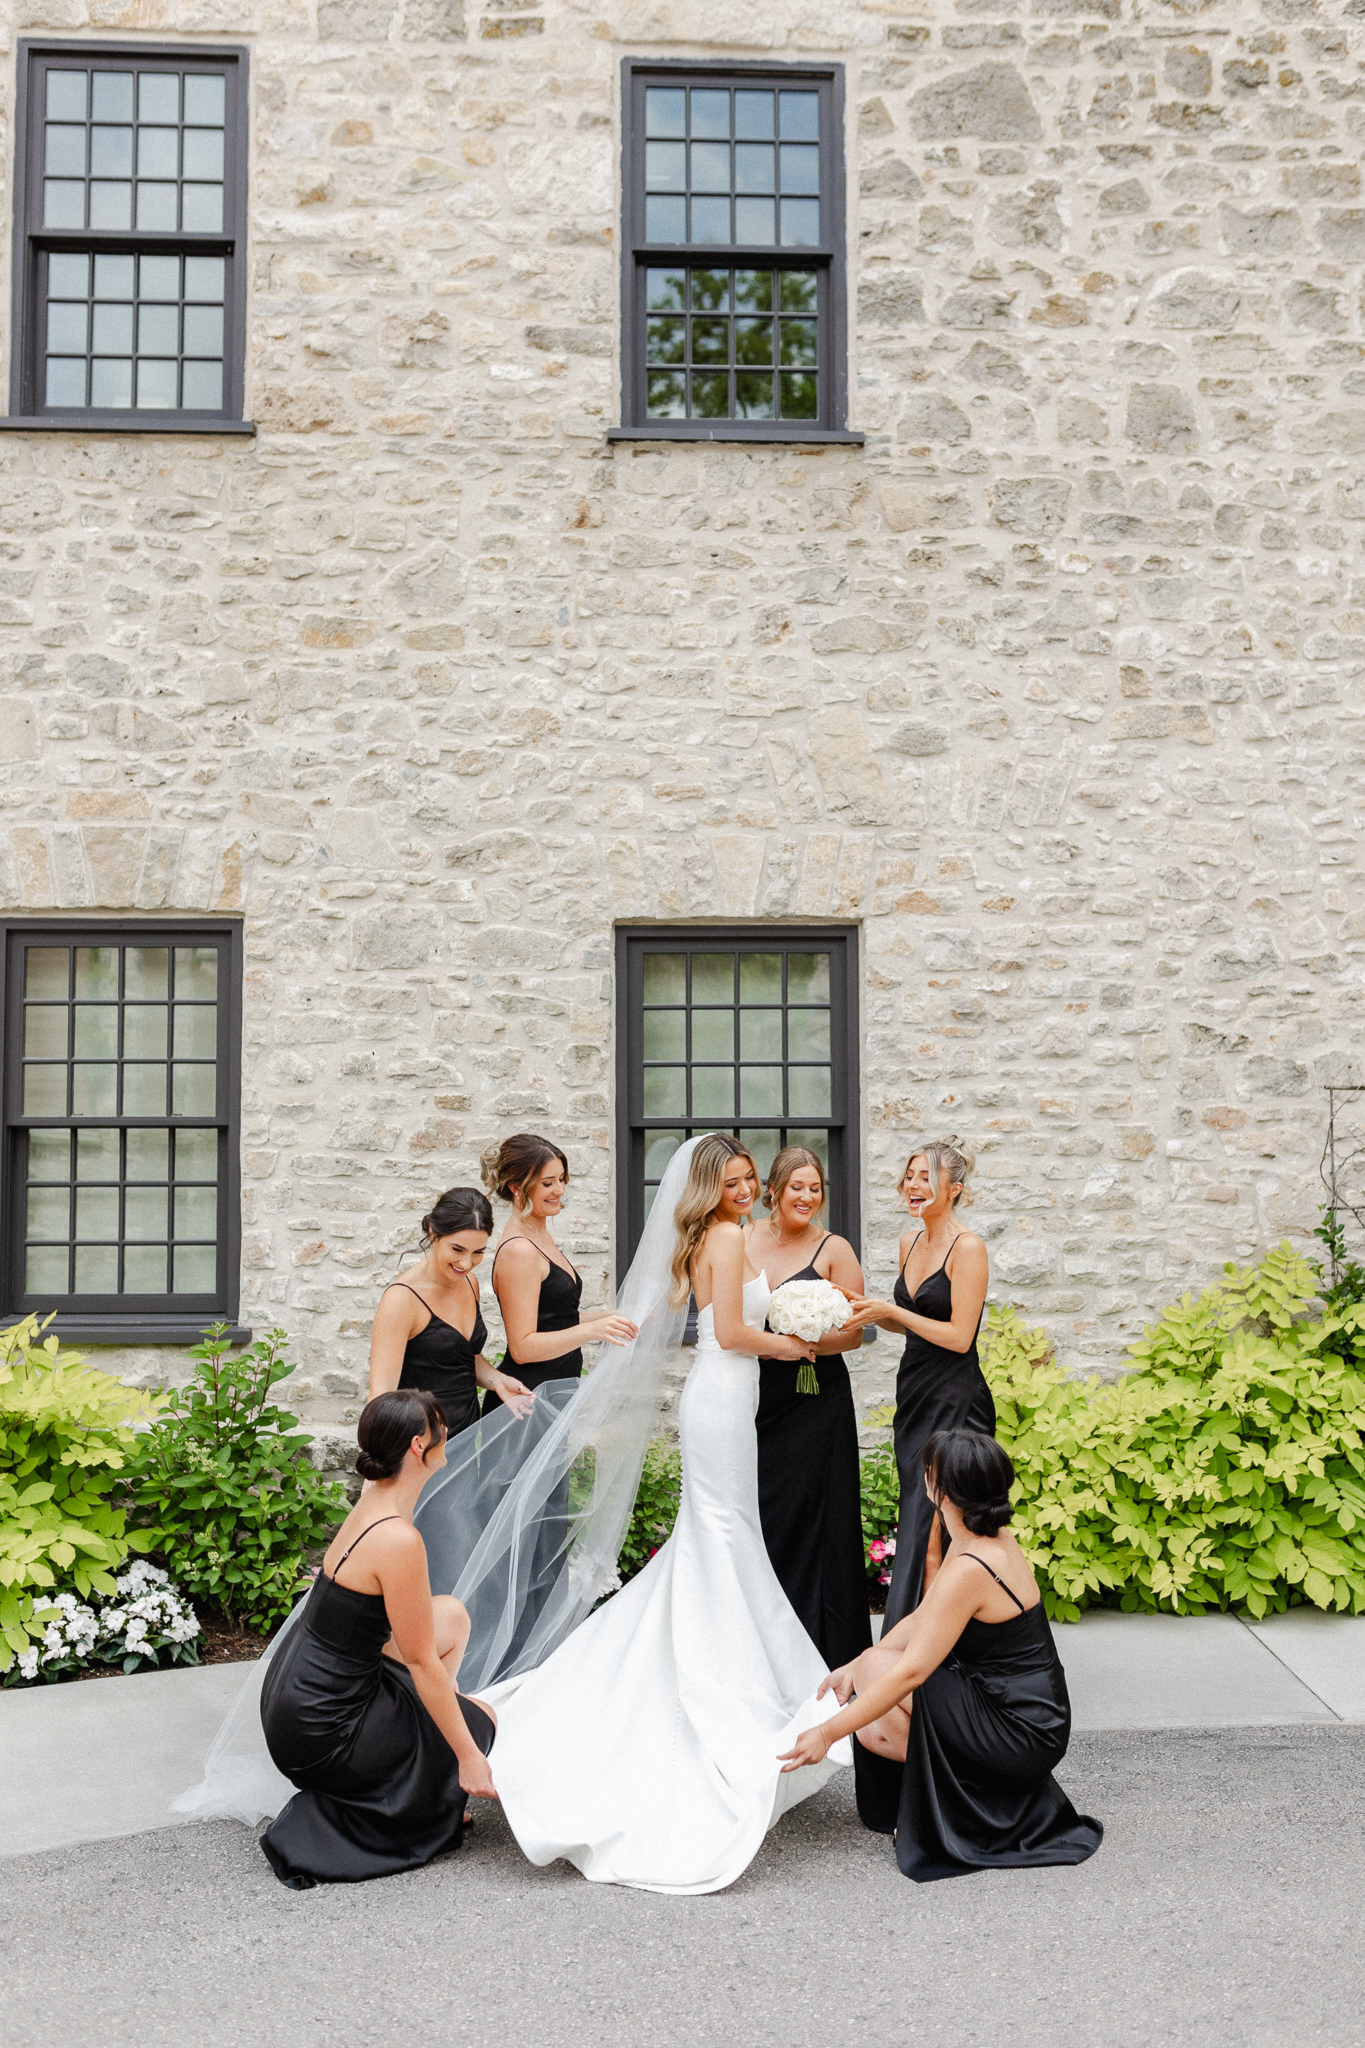 Bride and bridesmaids smile for a portrait outside a stone house, showcasing the brides dress